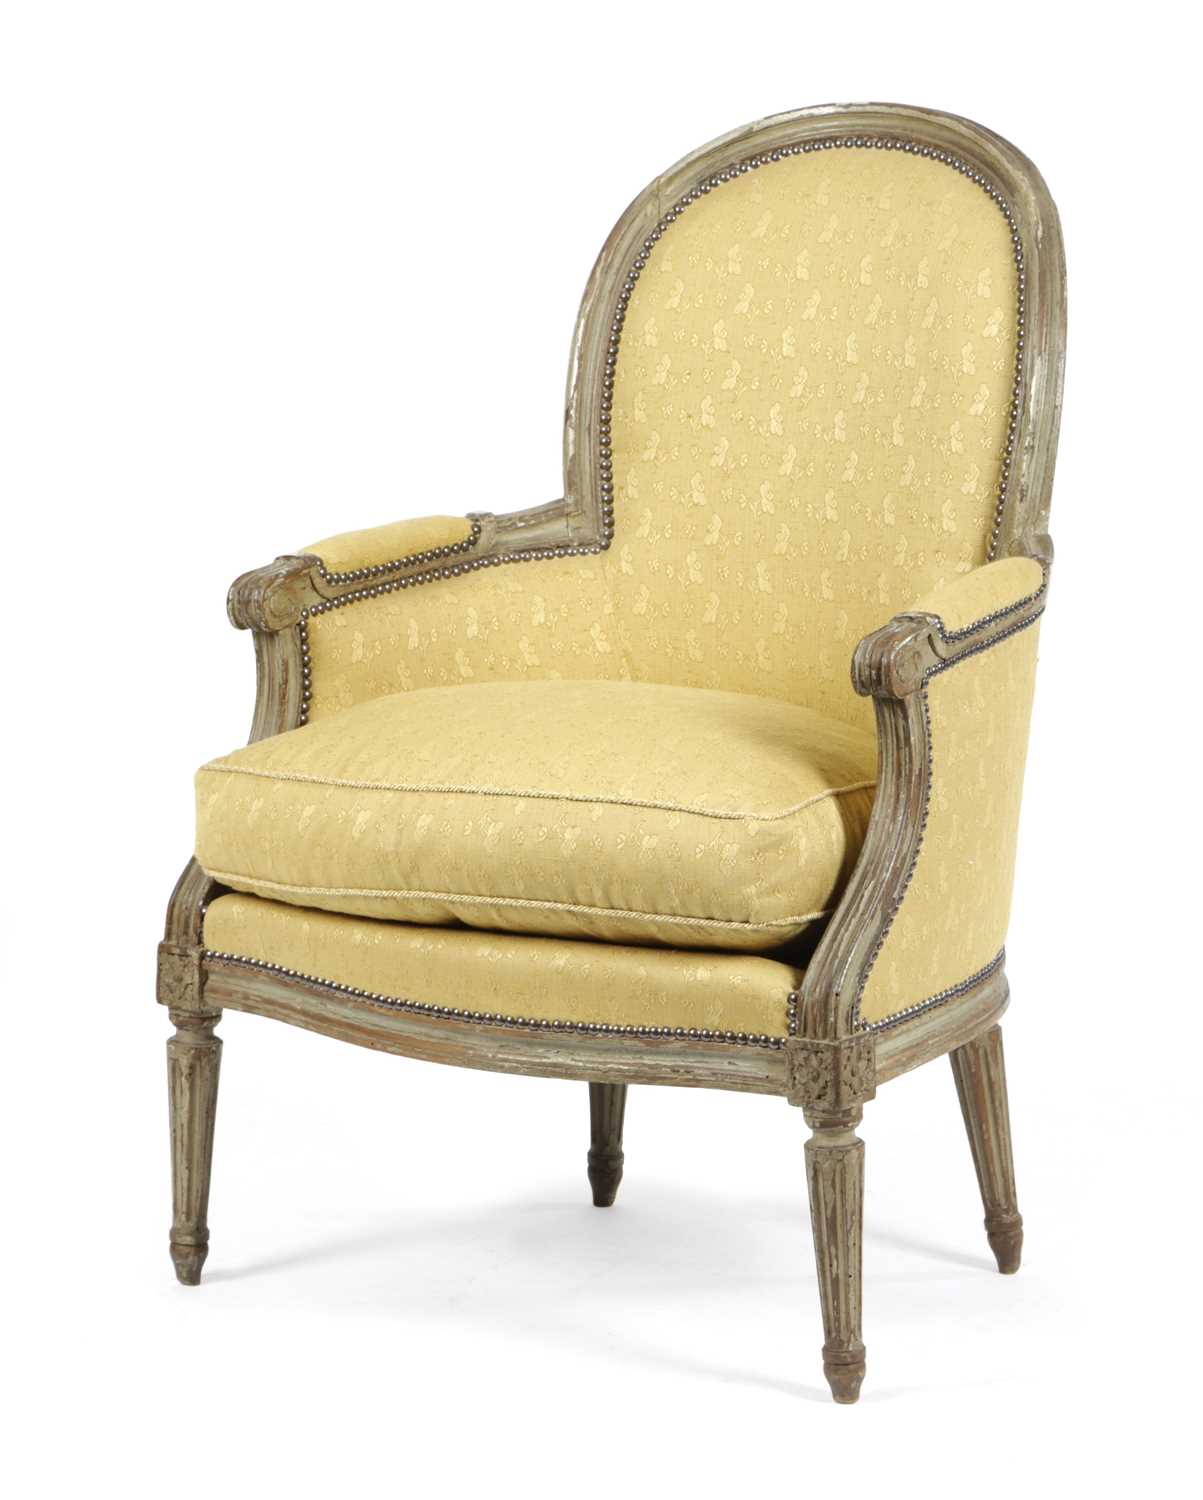 A FRENCH PAINTED BERGÈRE IN LOUIS XVI STYLE, 19TH CENTURY with an arched back and a moulded frame